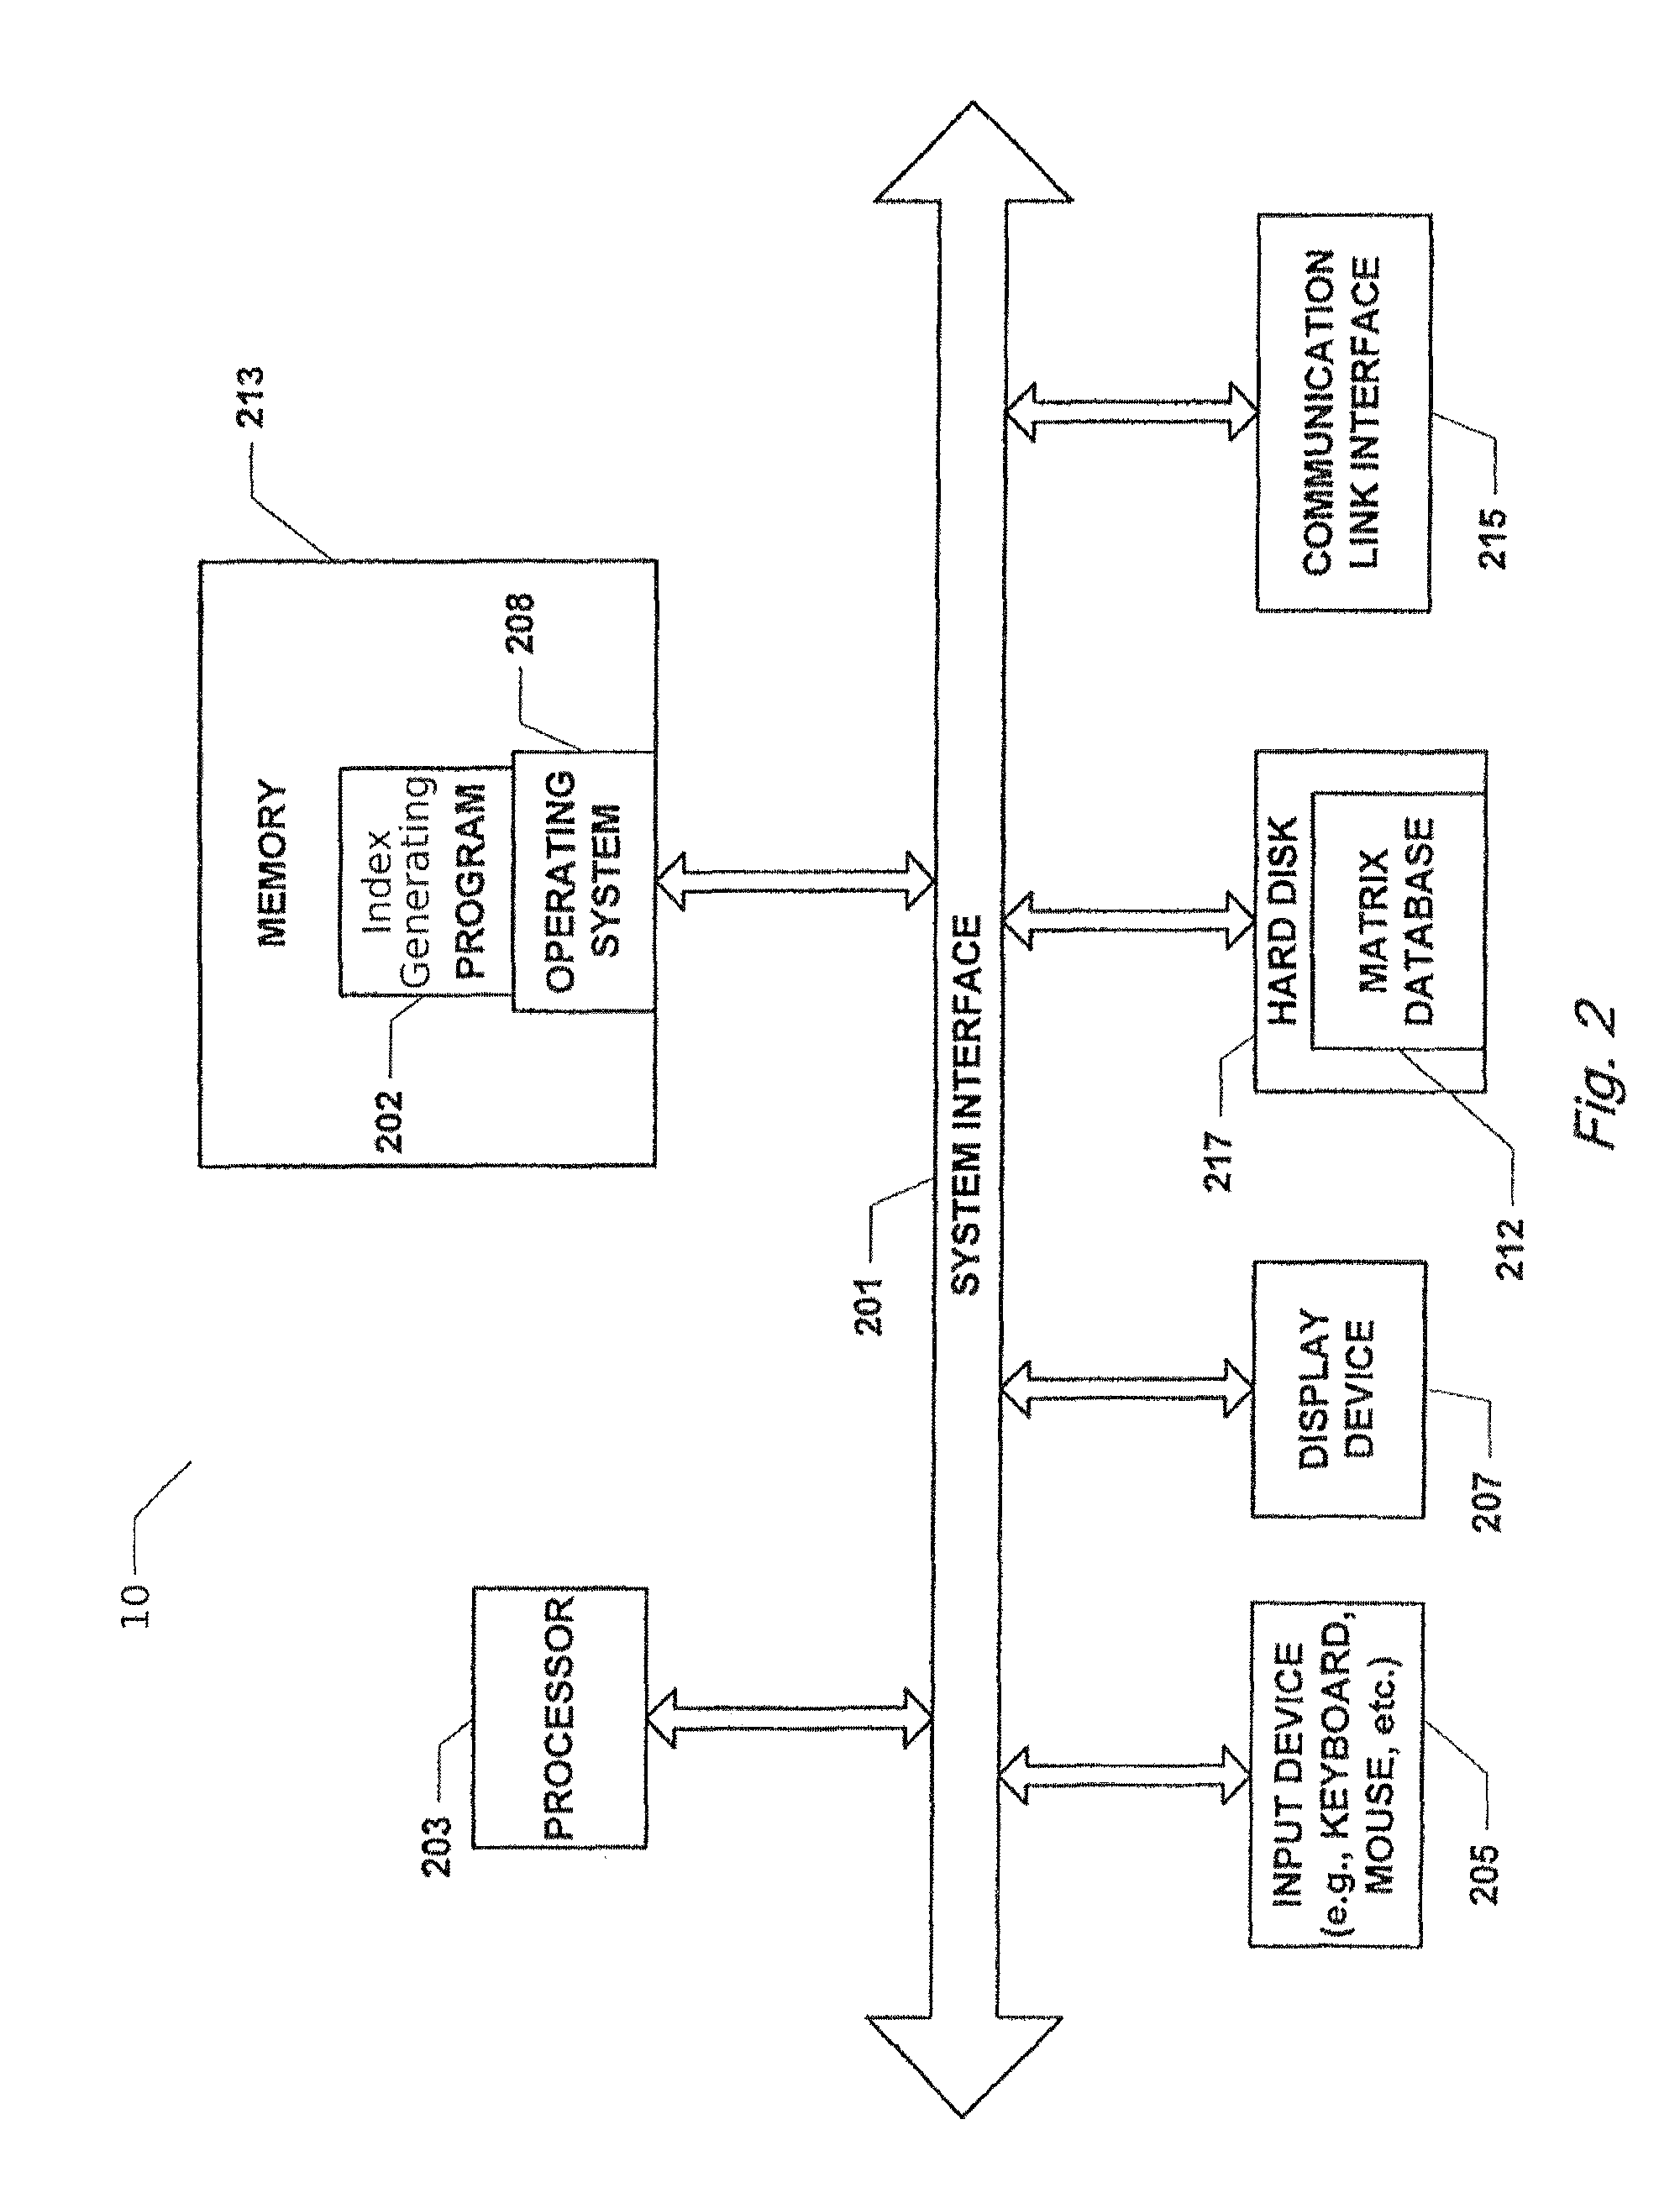 System and method for predicting tornado activity